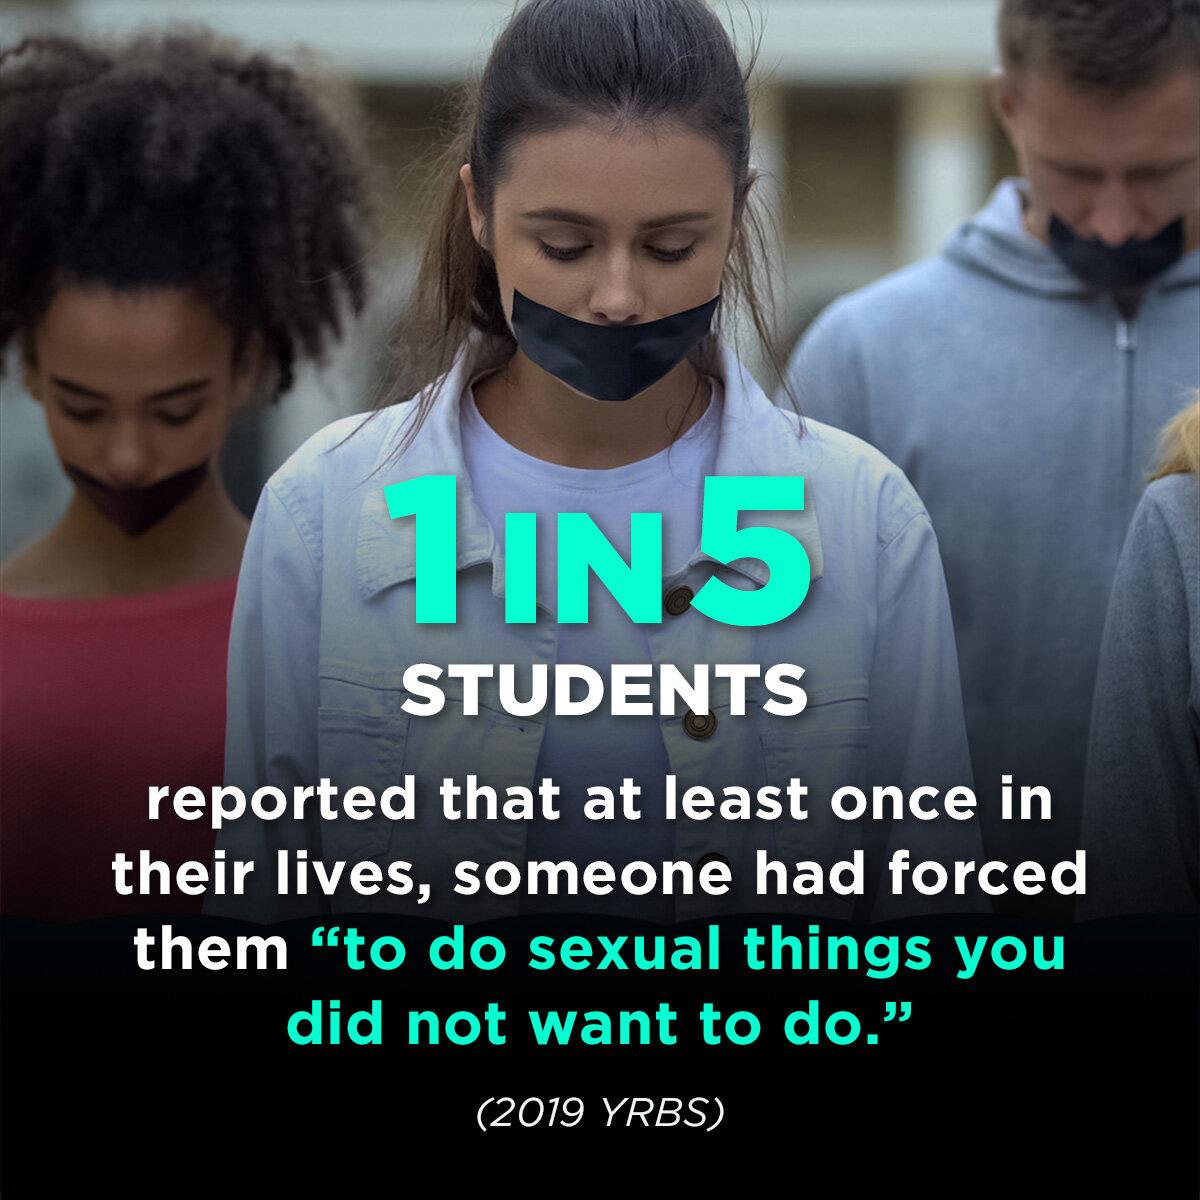 February is Teen Dating Violence Awareness &amp; Prevention Month. For additional information, please don't hesitate to view our domestic violence resources: https://www.ywcarockcounty.org/domestic-violence-resources